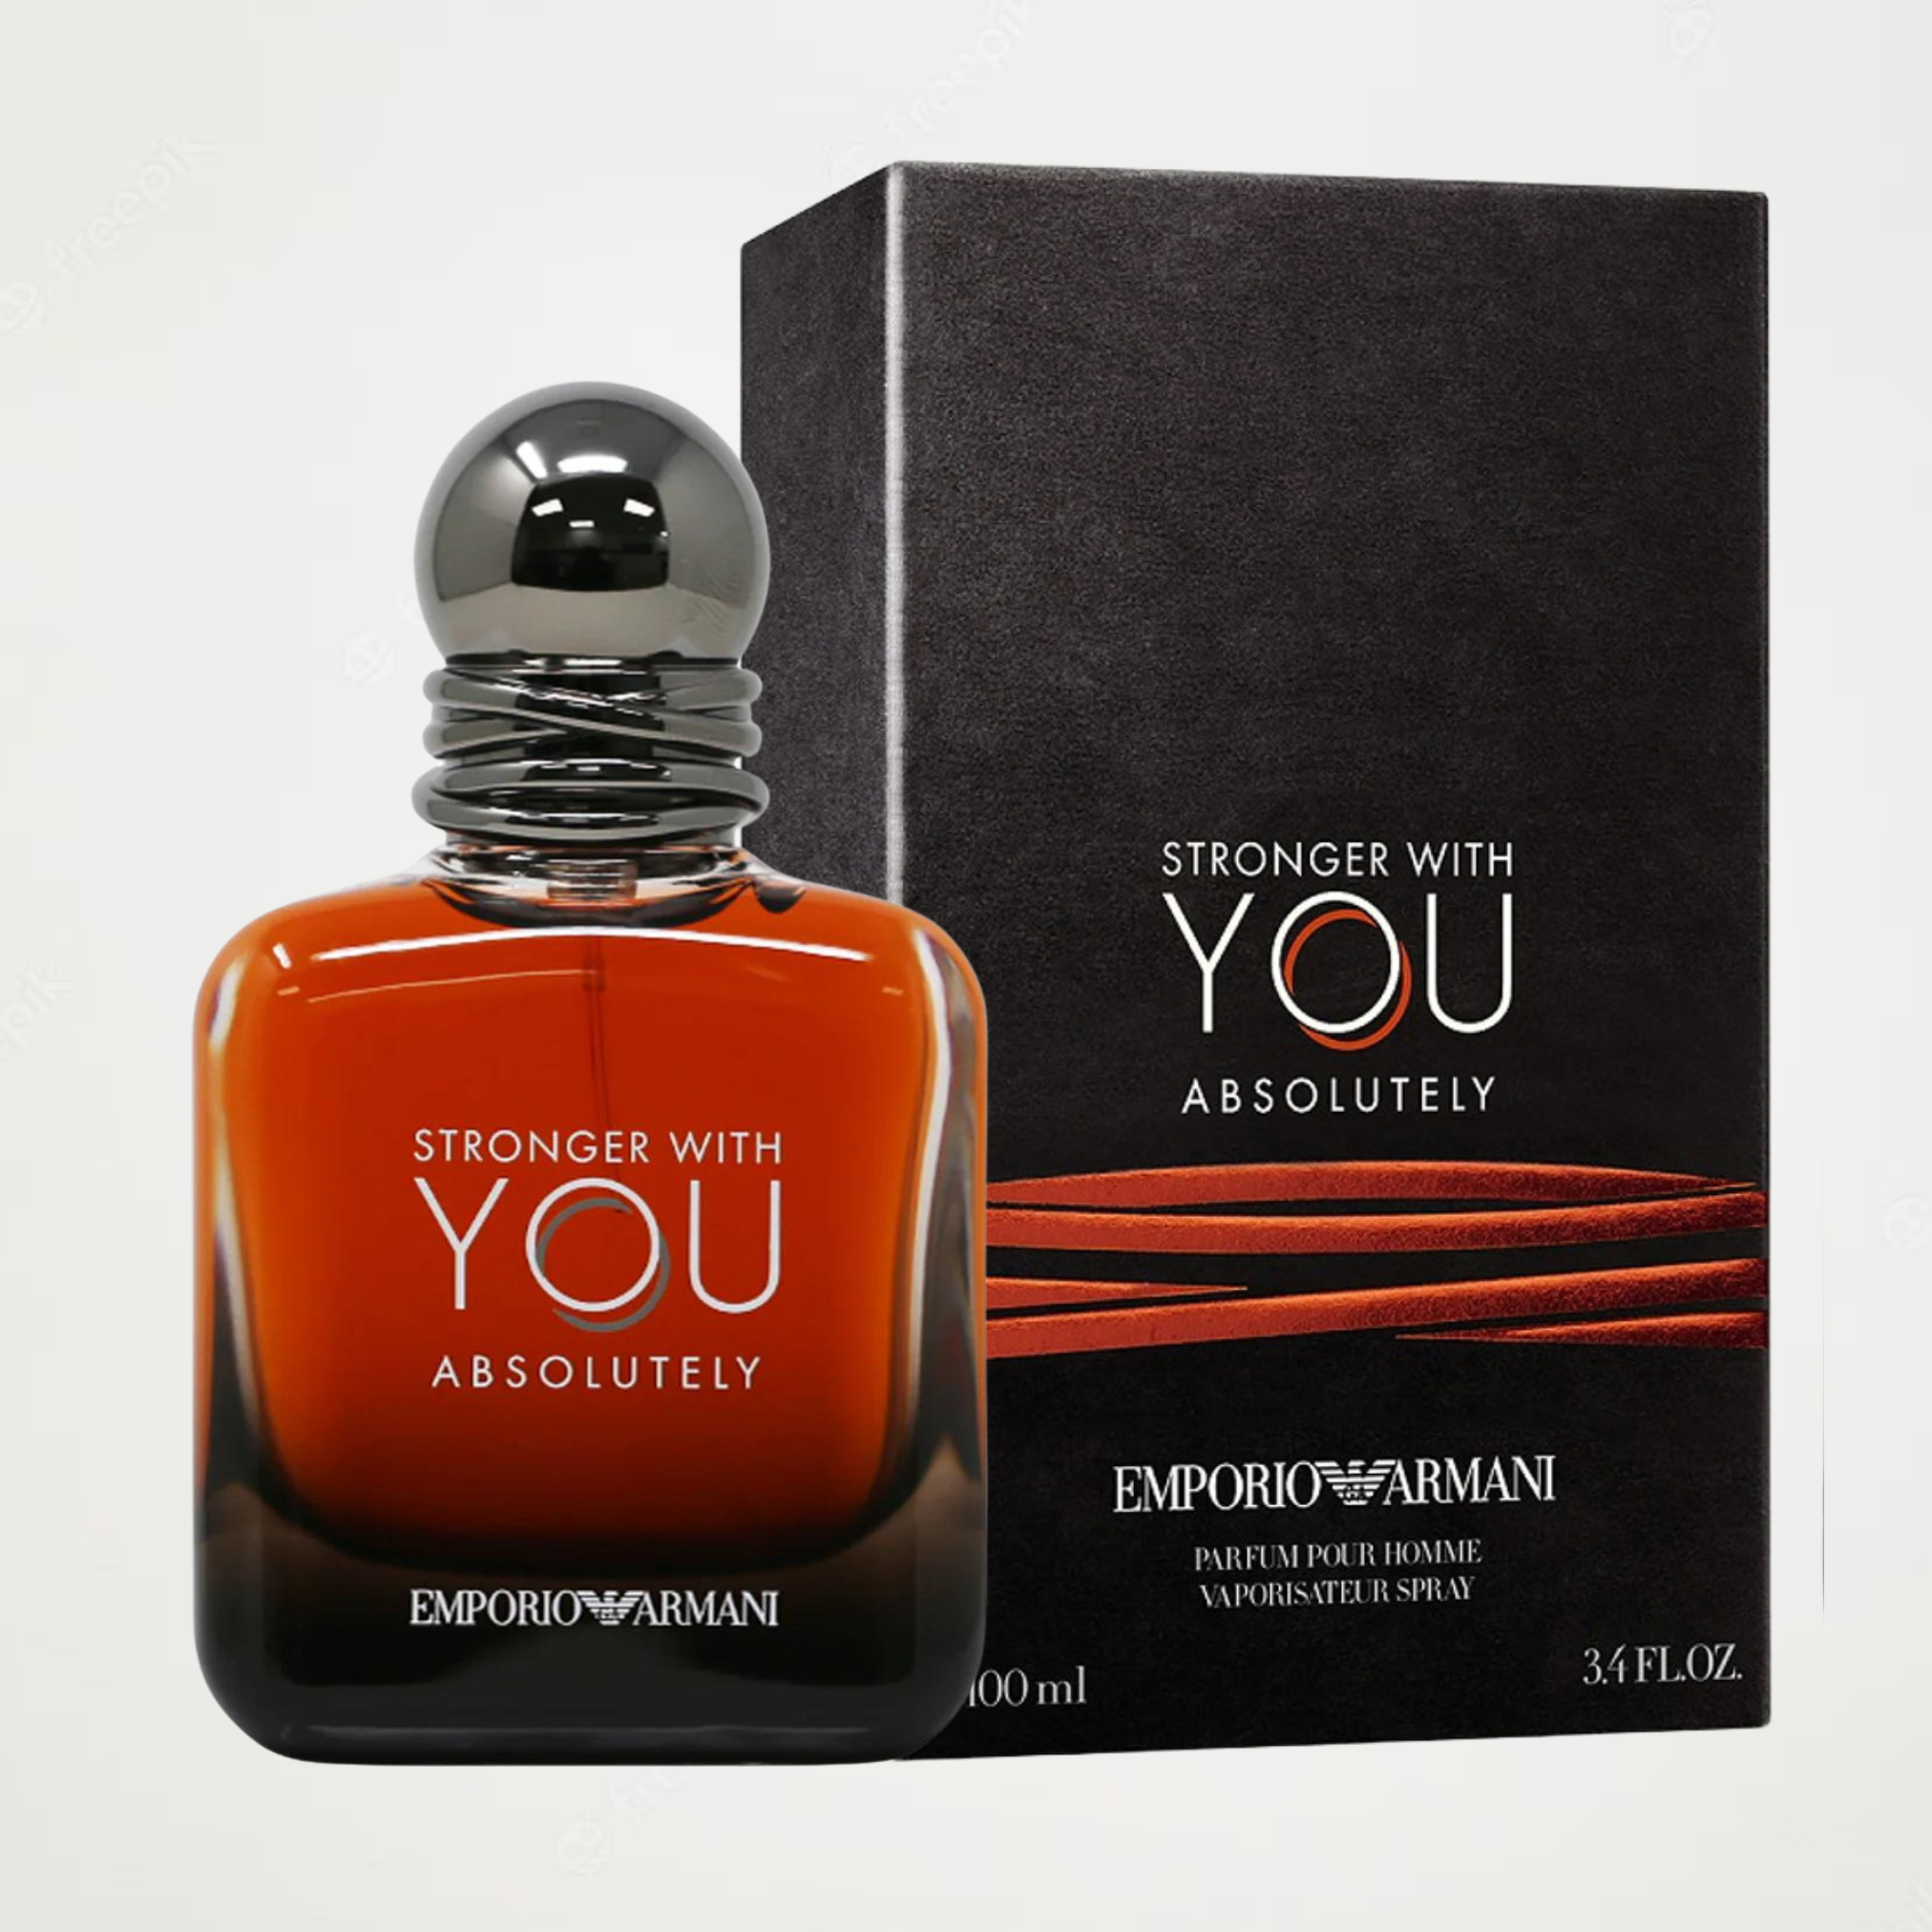 Emporio Armani Stronger With You Absolutely (EDP)